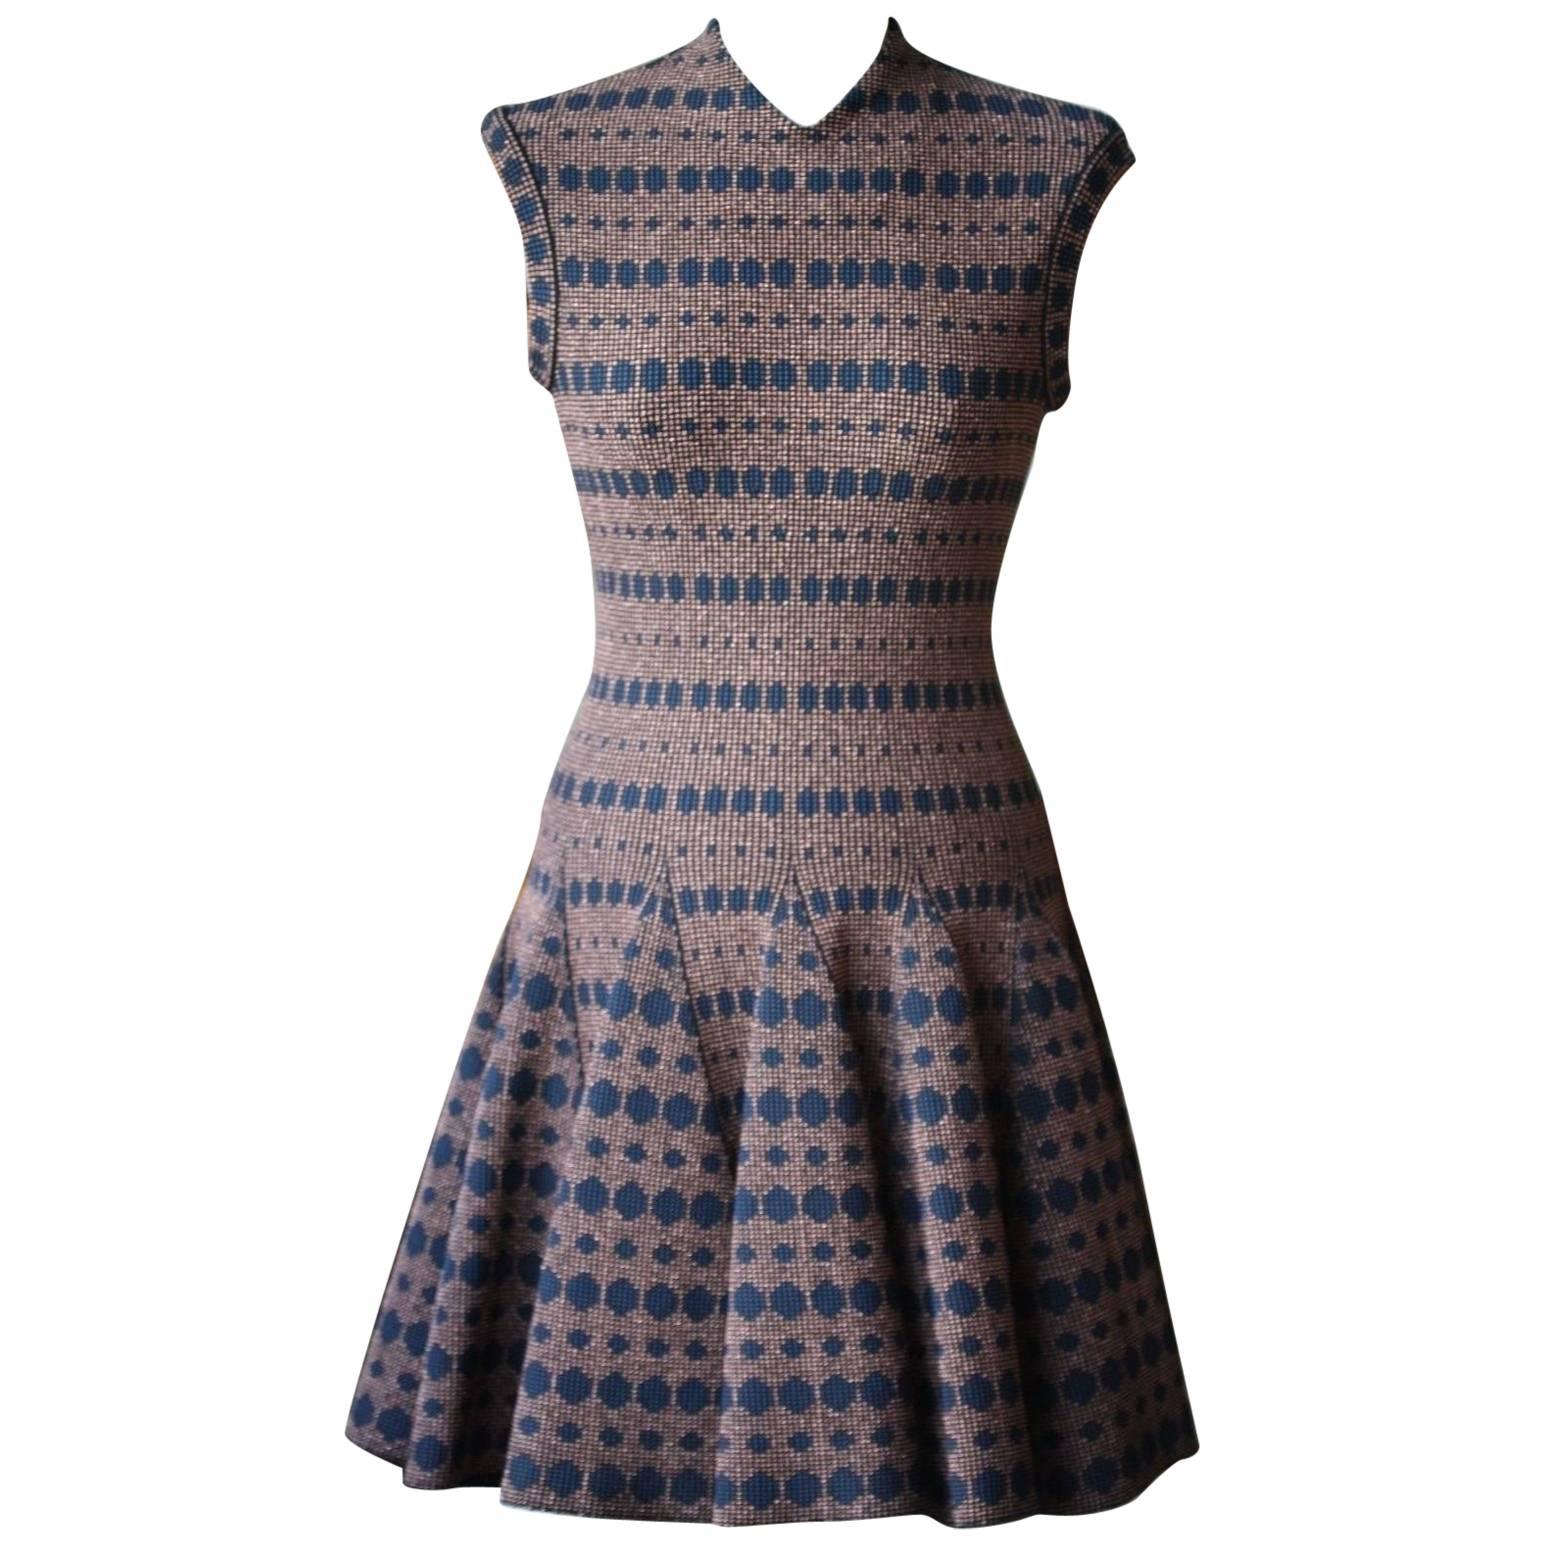 Azzedine Alaia Bronze and Navy Dotted Dress